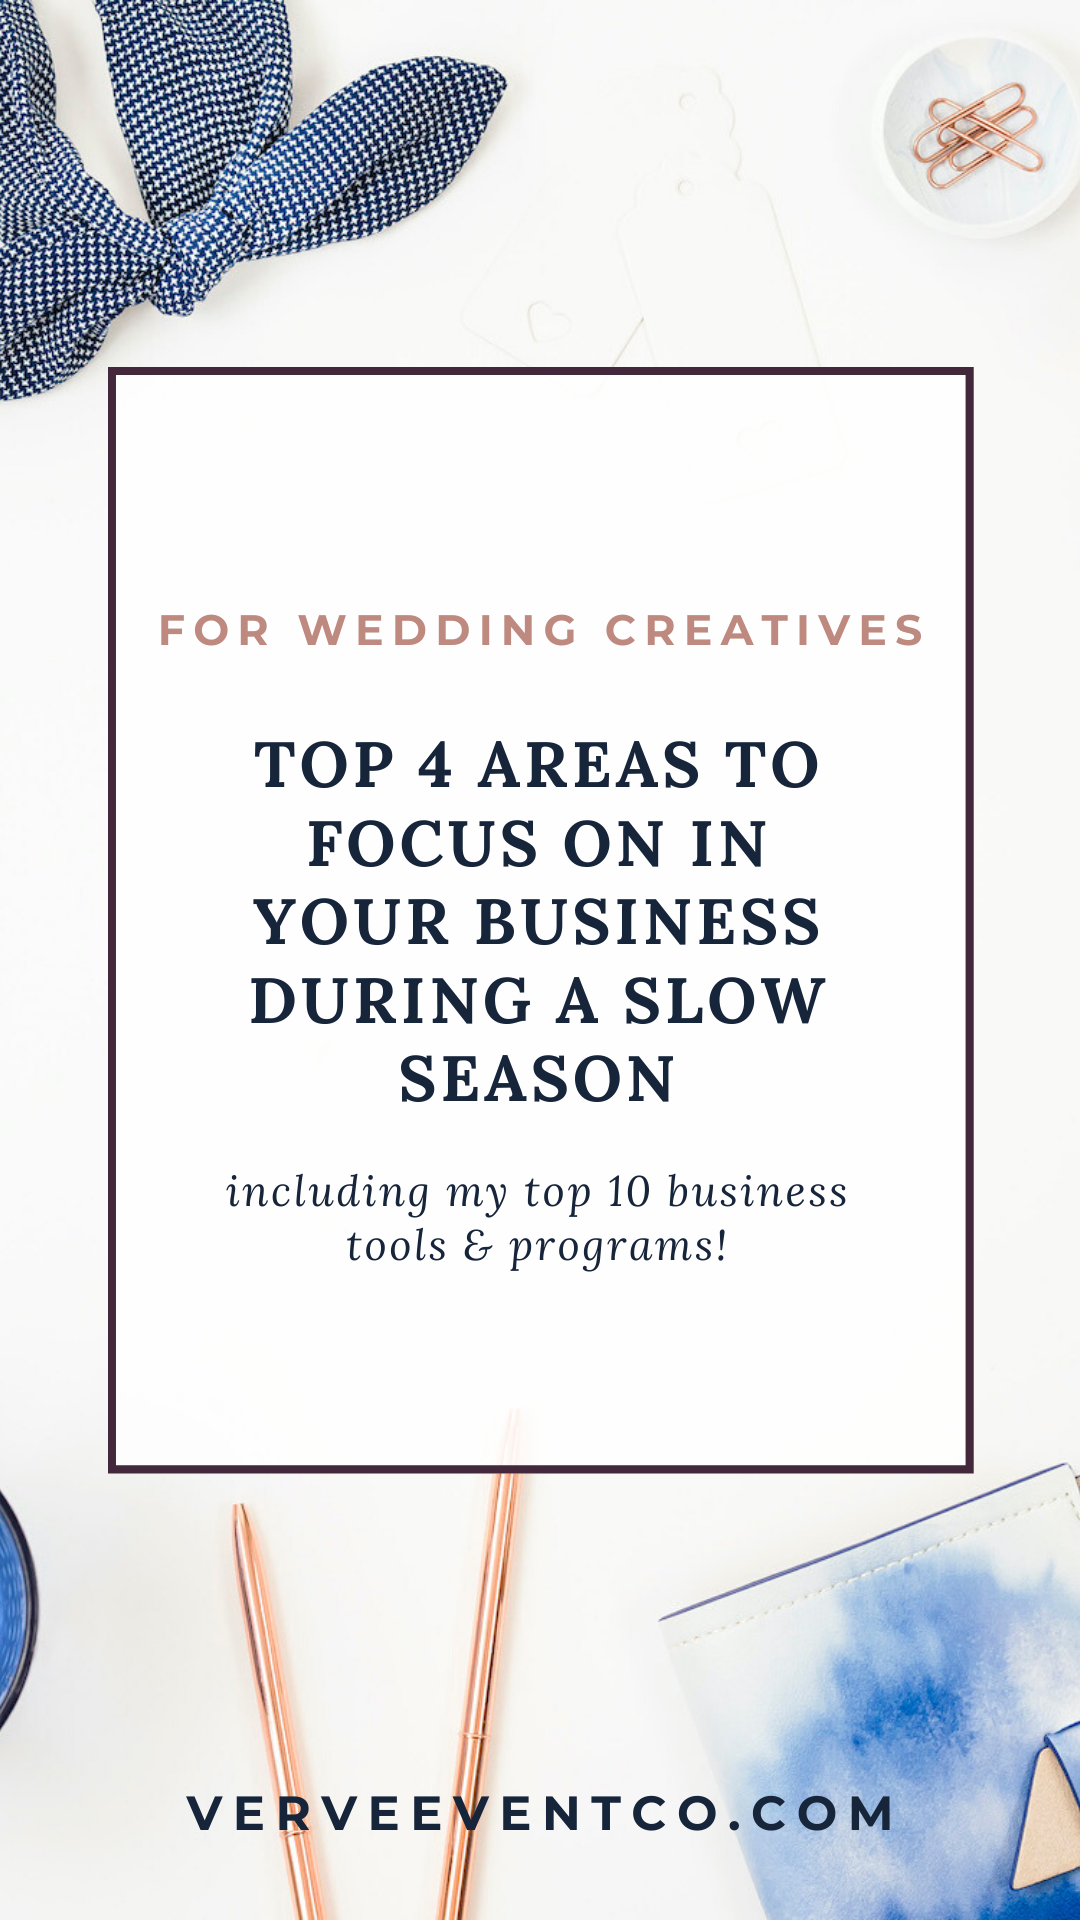 Top 4 Areas to Focus On In Your Business During A Slow Wedding Season